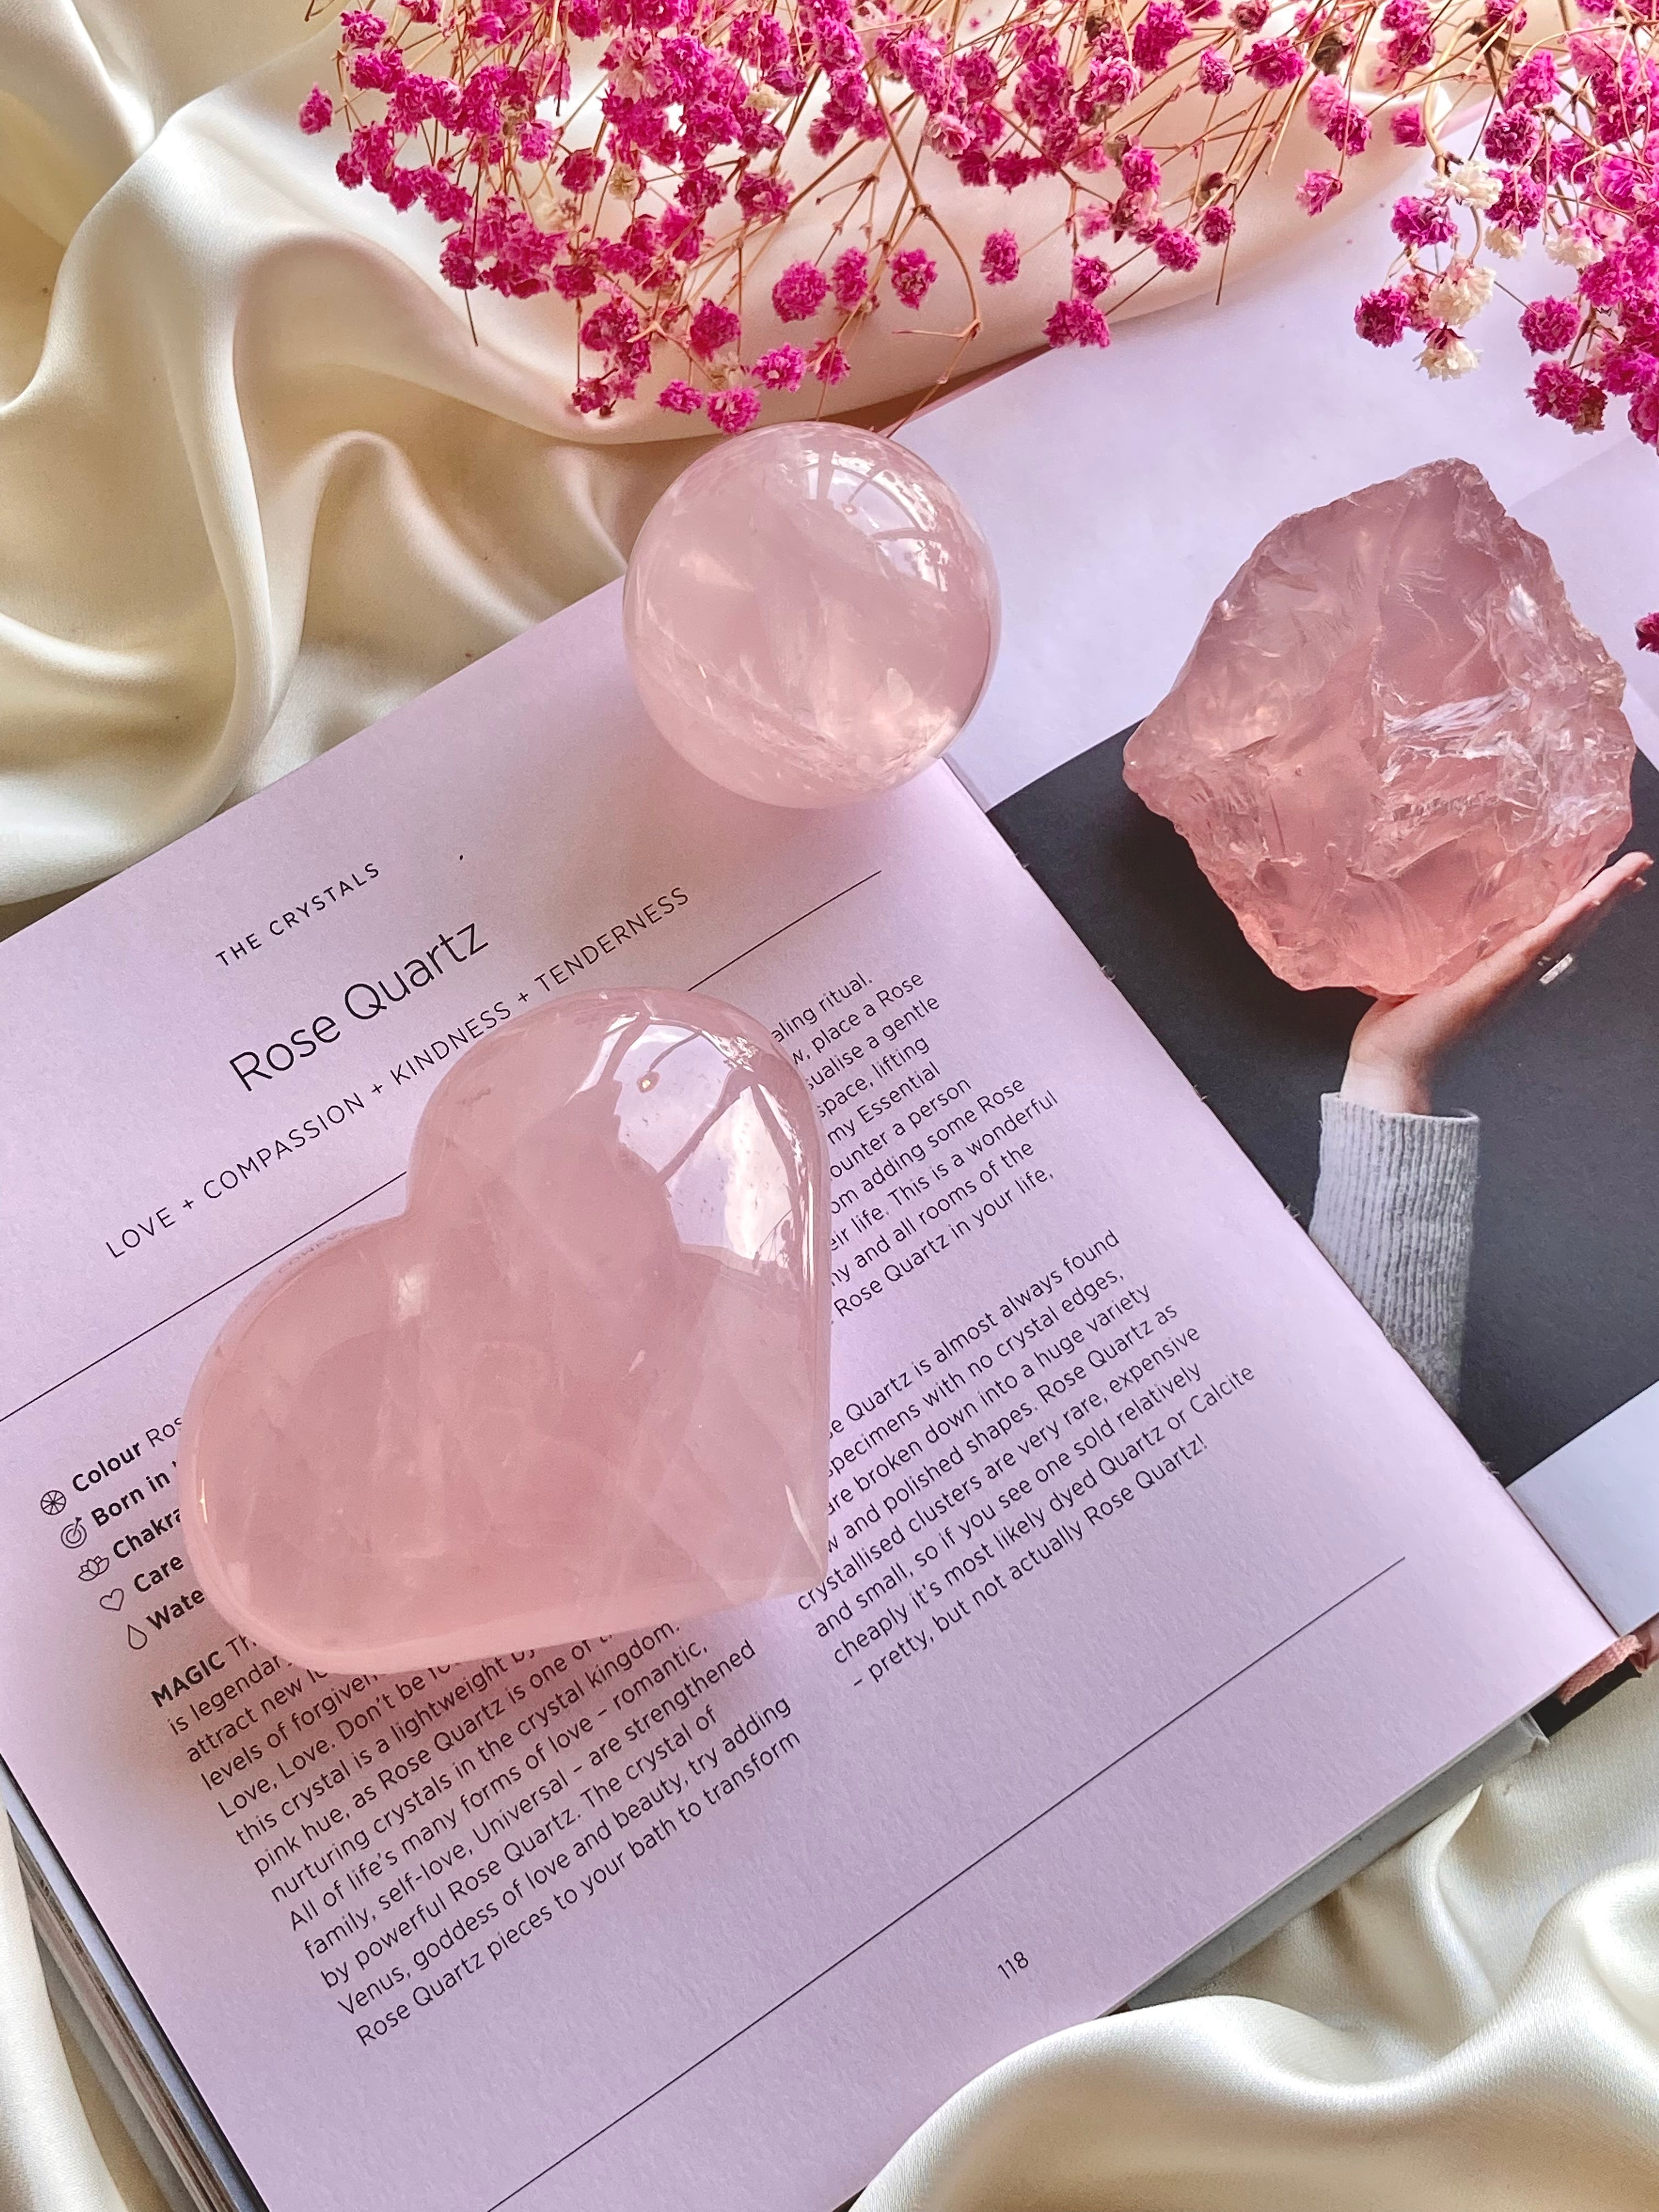 Crystals for cultivating Self-Love